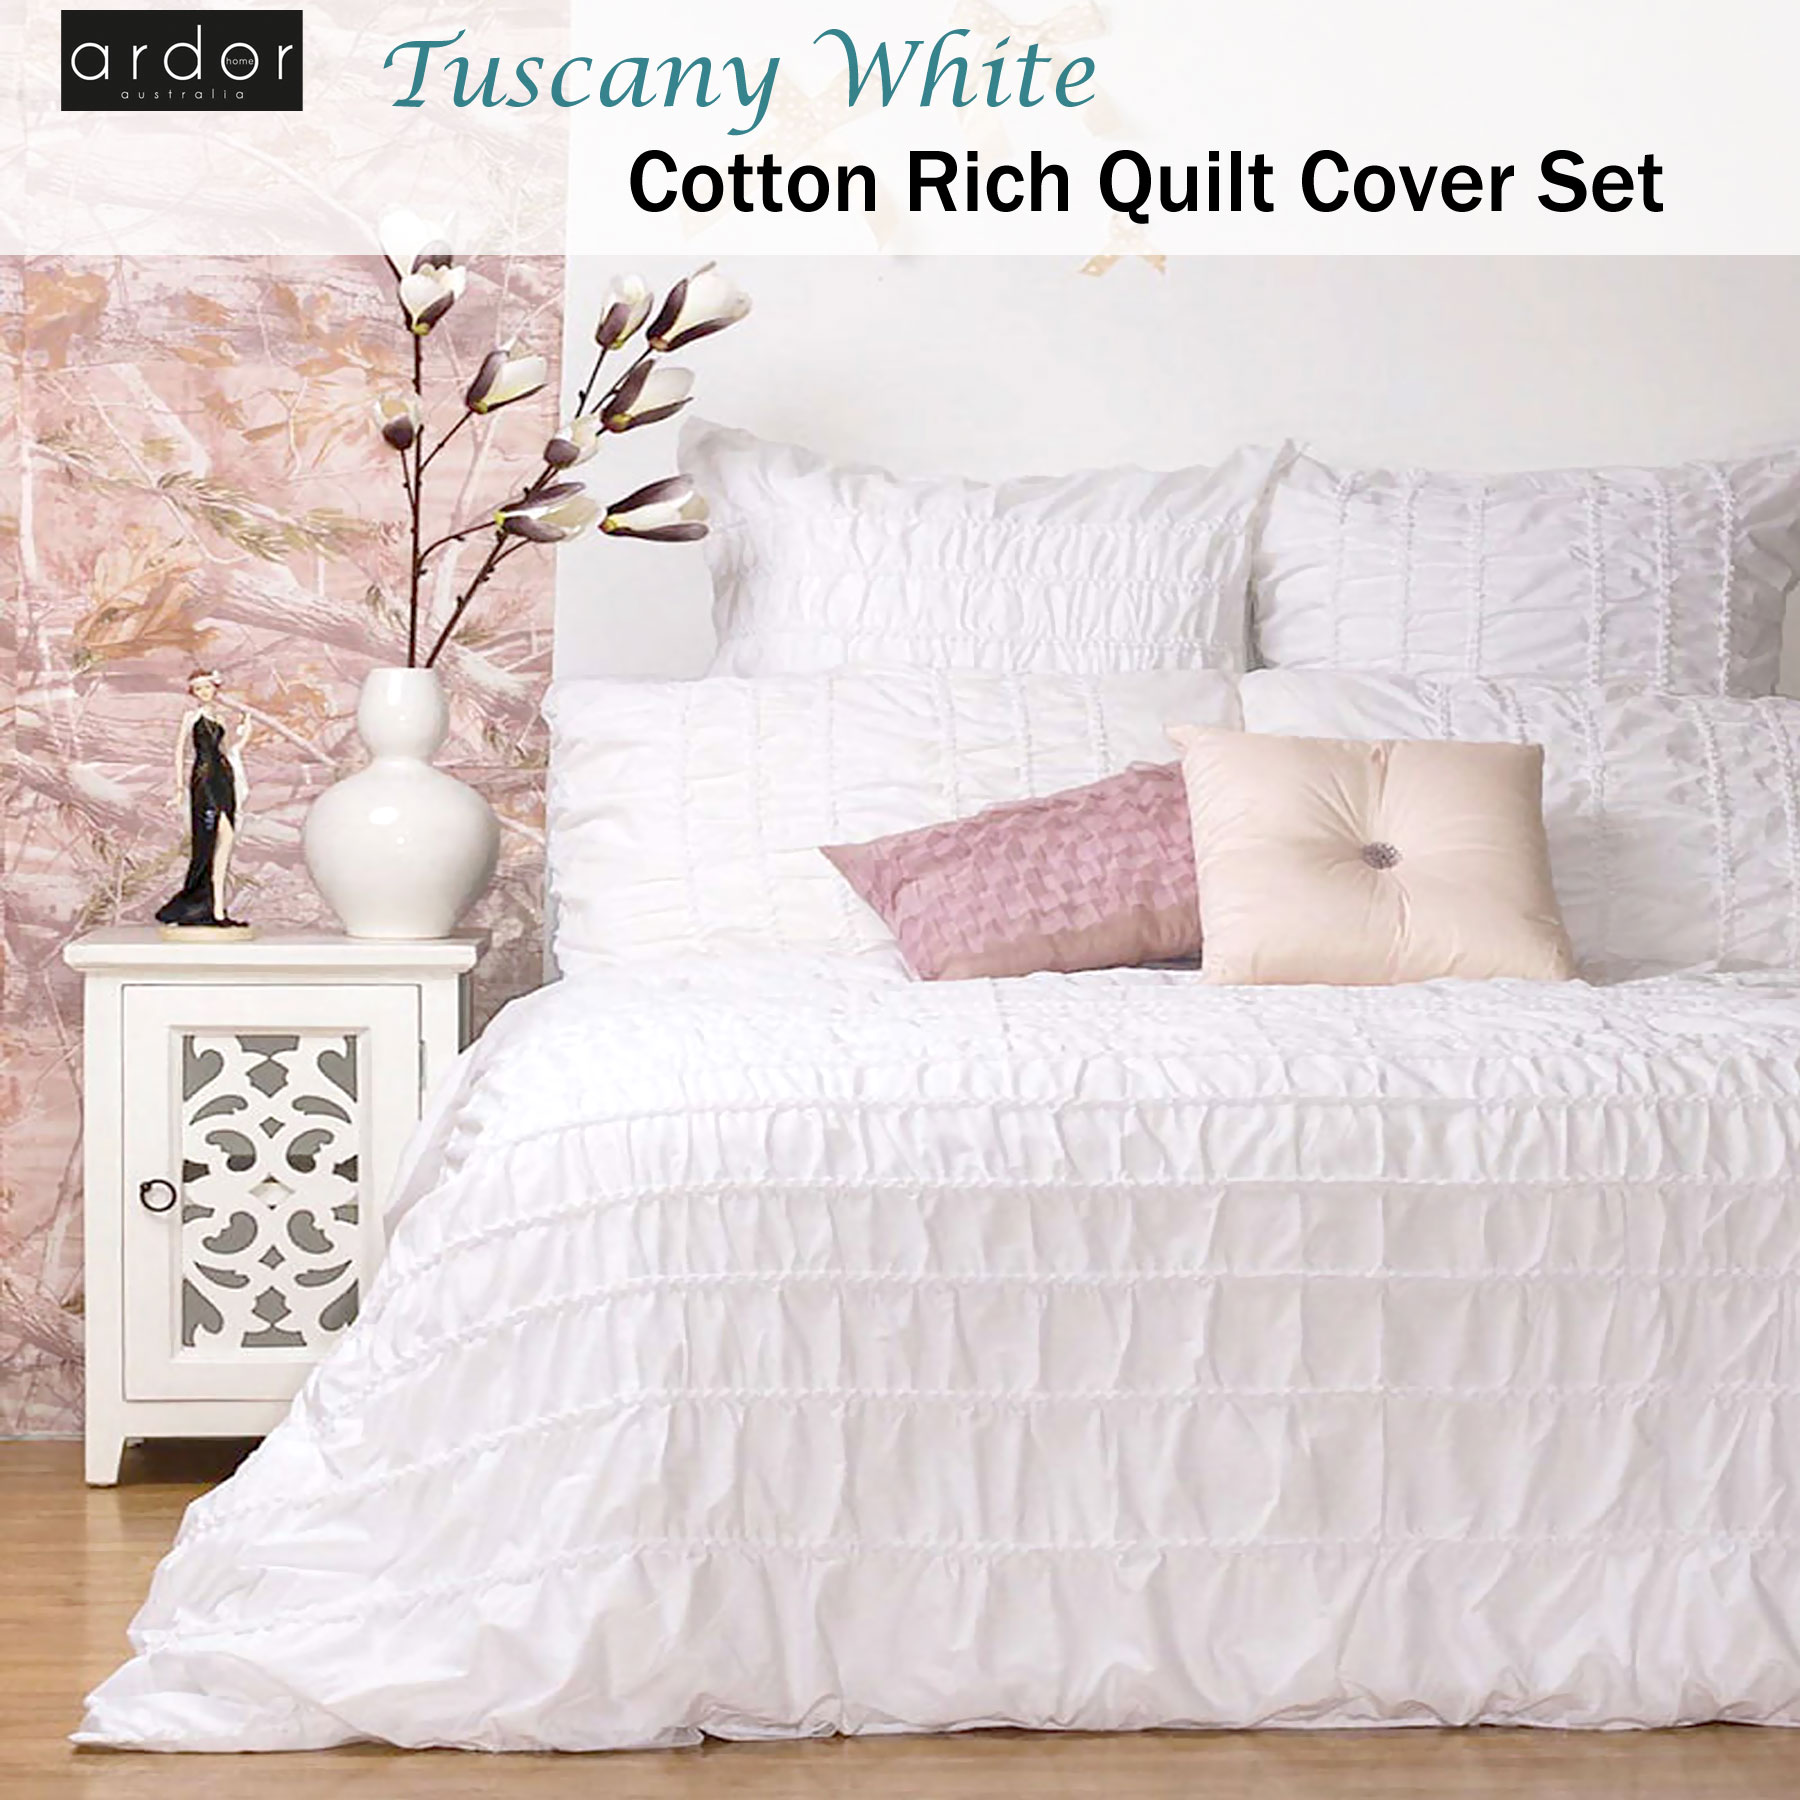 3 Pce Cotton Rich Tuscany White Ruched Quilt Cover Set By Ardor